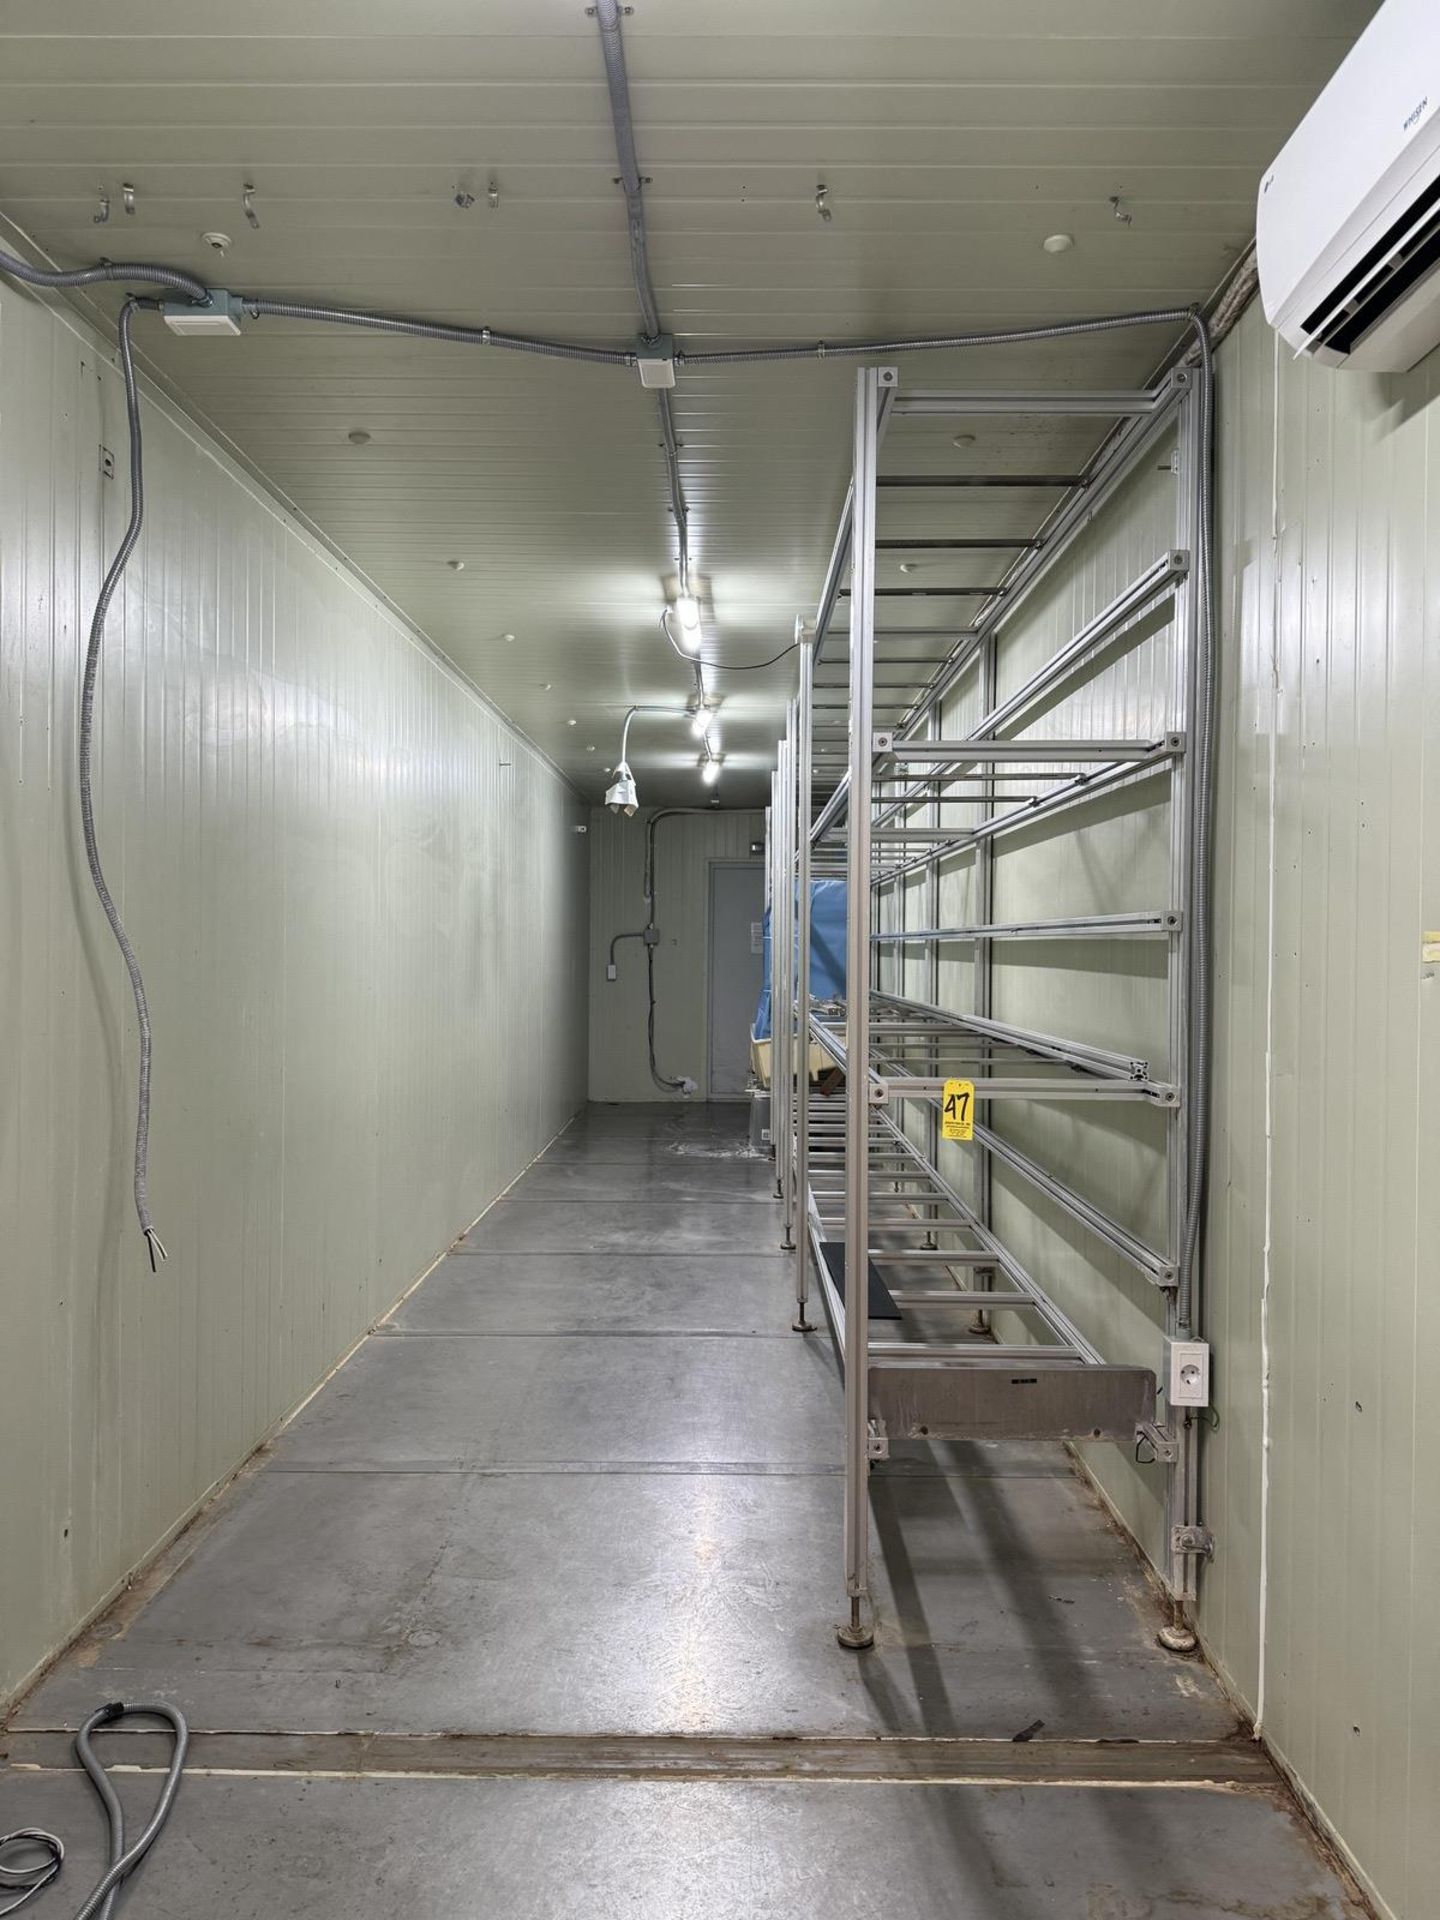 40' x 8' Customized Vertical Farming Container Including 28' Custom Built Rack, Electrics, Rear Exit - Image 8 of 18